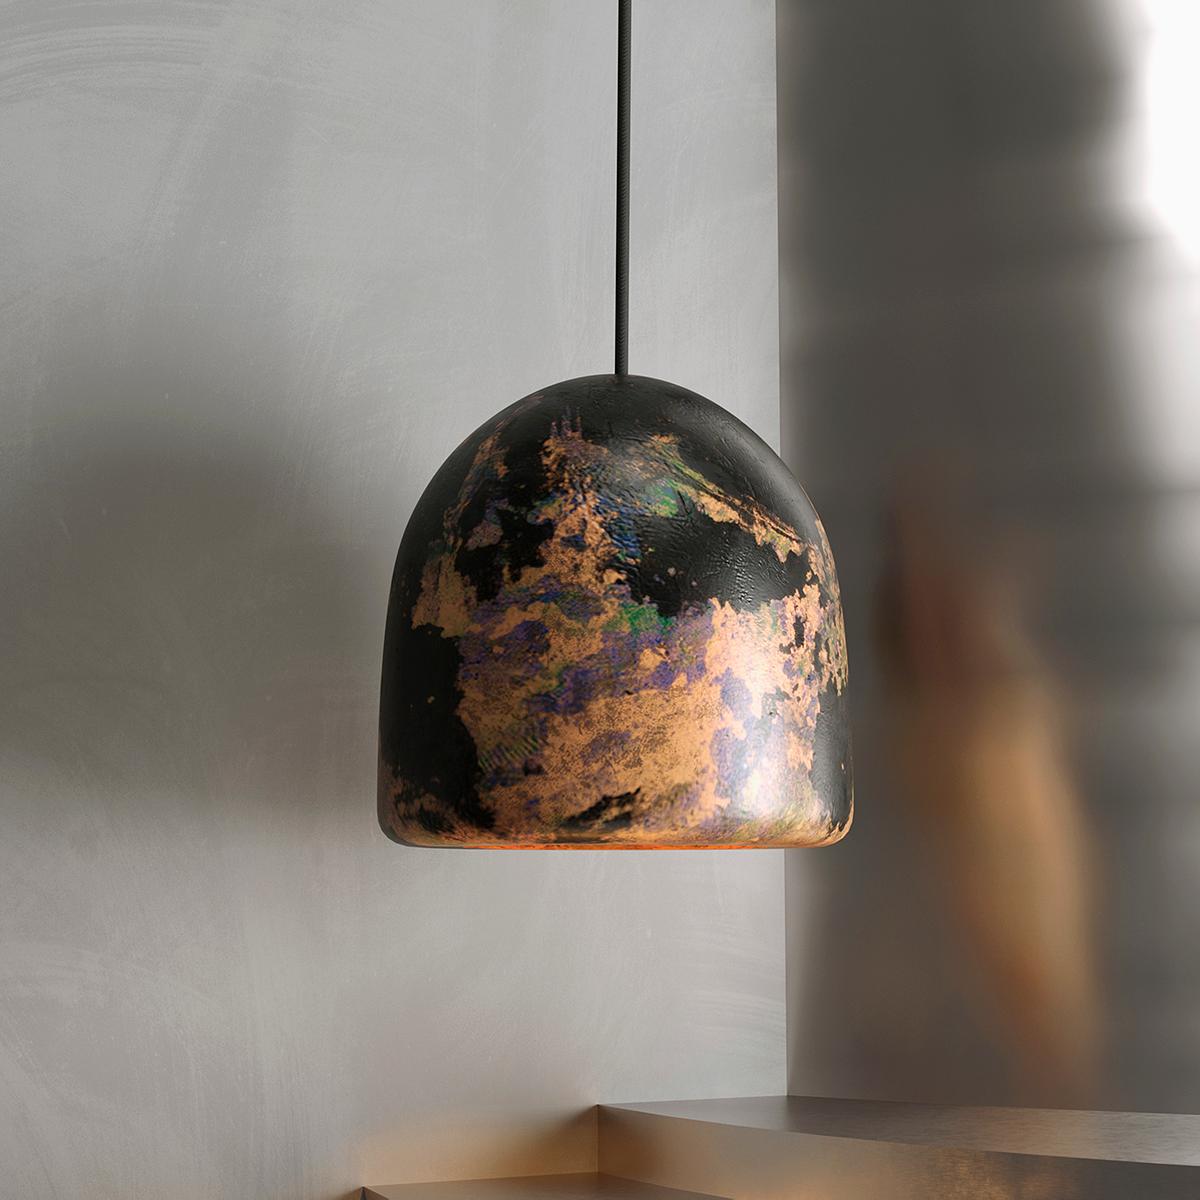 Prianyk small pendant lamp by Makhno
Dimensions: D 34 x W 34 x H 42 cm
Materials: Ceramics

All our lamps can be wired according to each country. If sold to the USA it will be wired for the USA for instance.

Makhno Studio is a workshop of modern